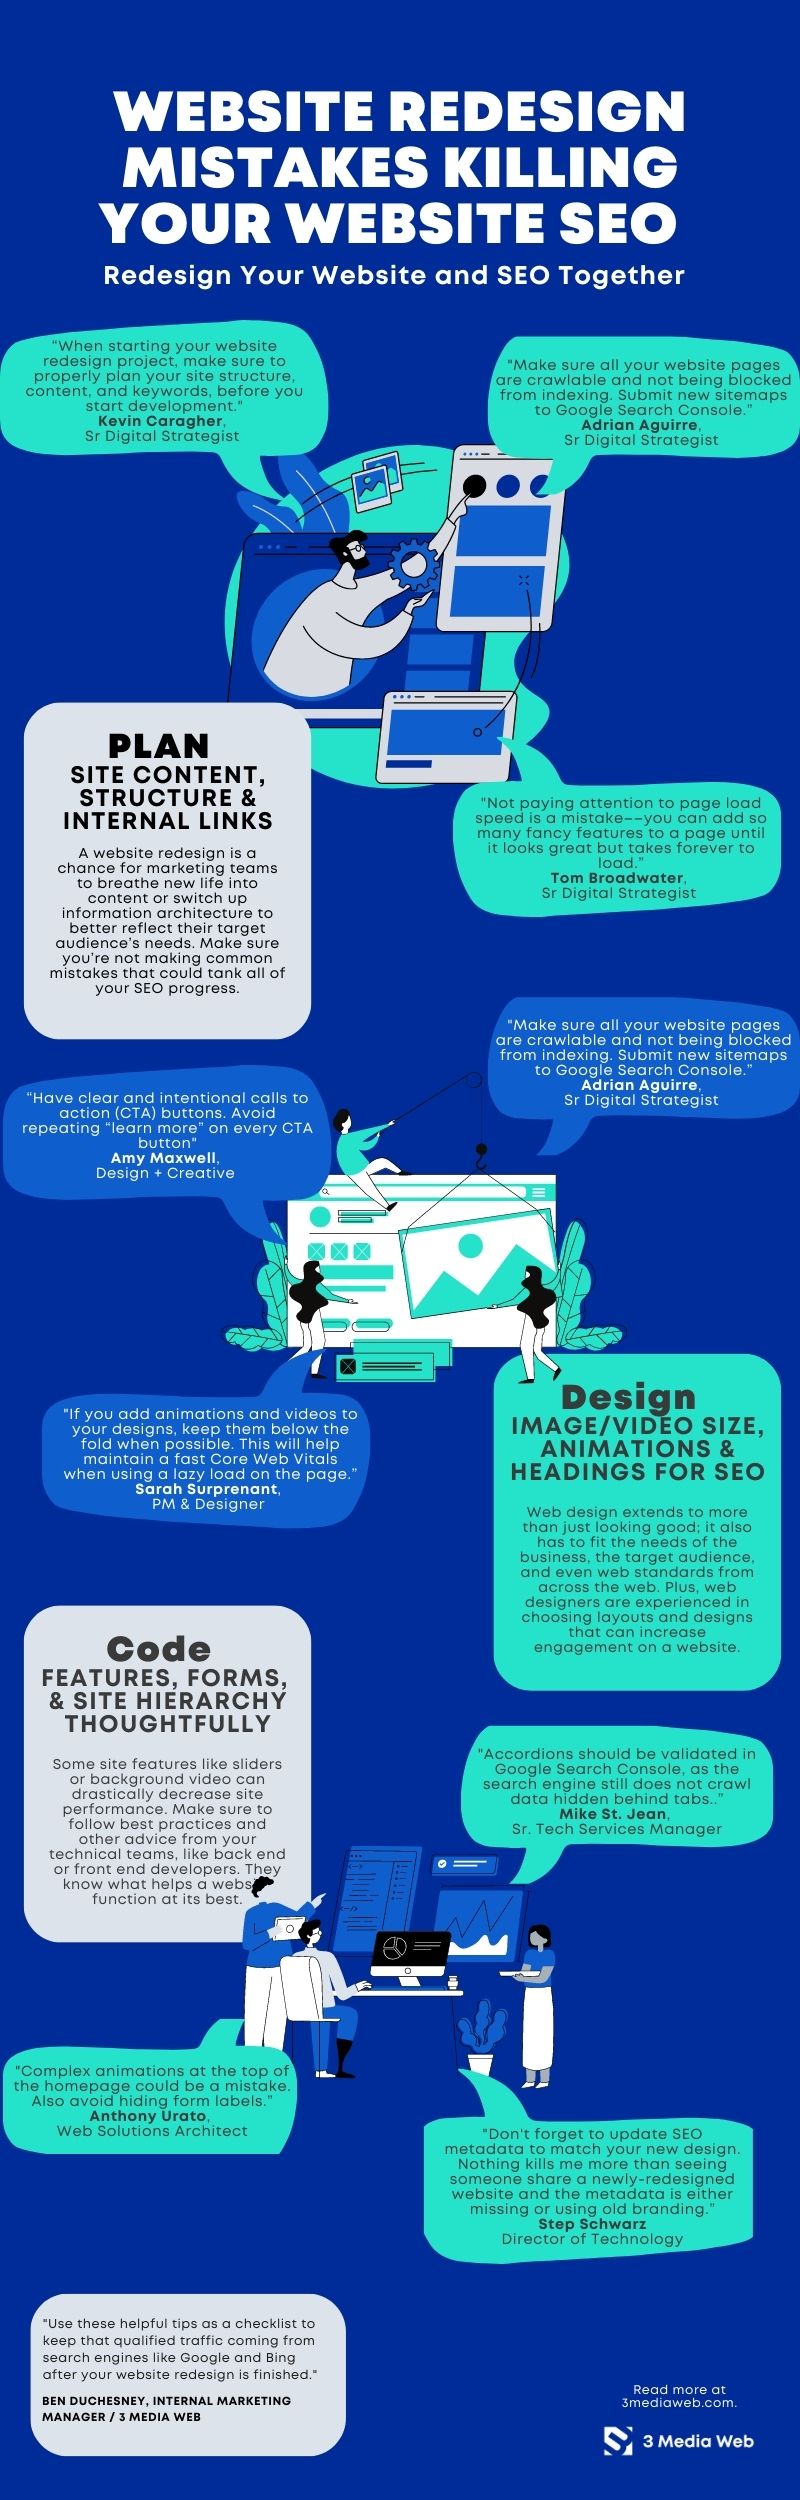 Use this infographic as a checklist to erase common SEO mistakes during a website redesign.